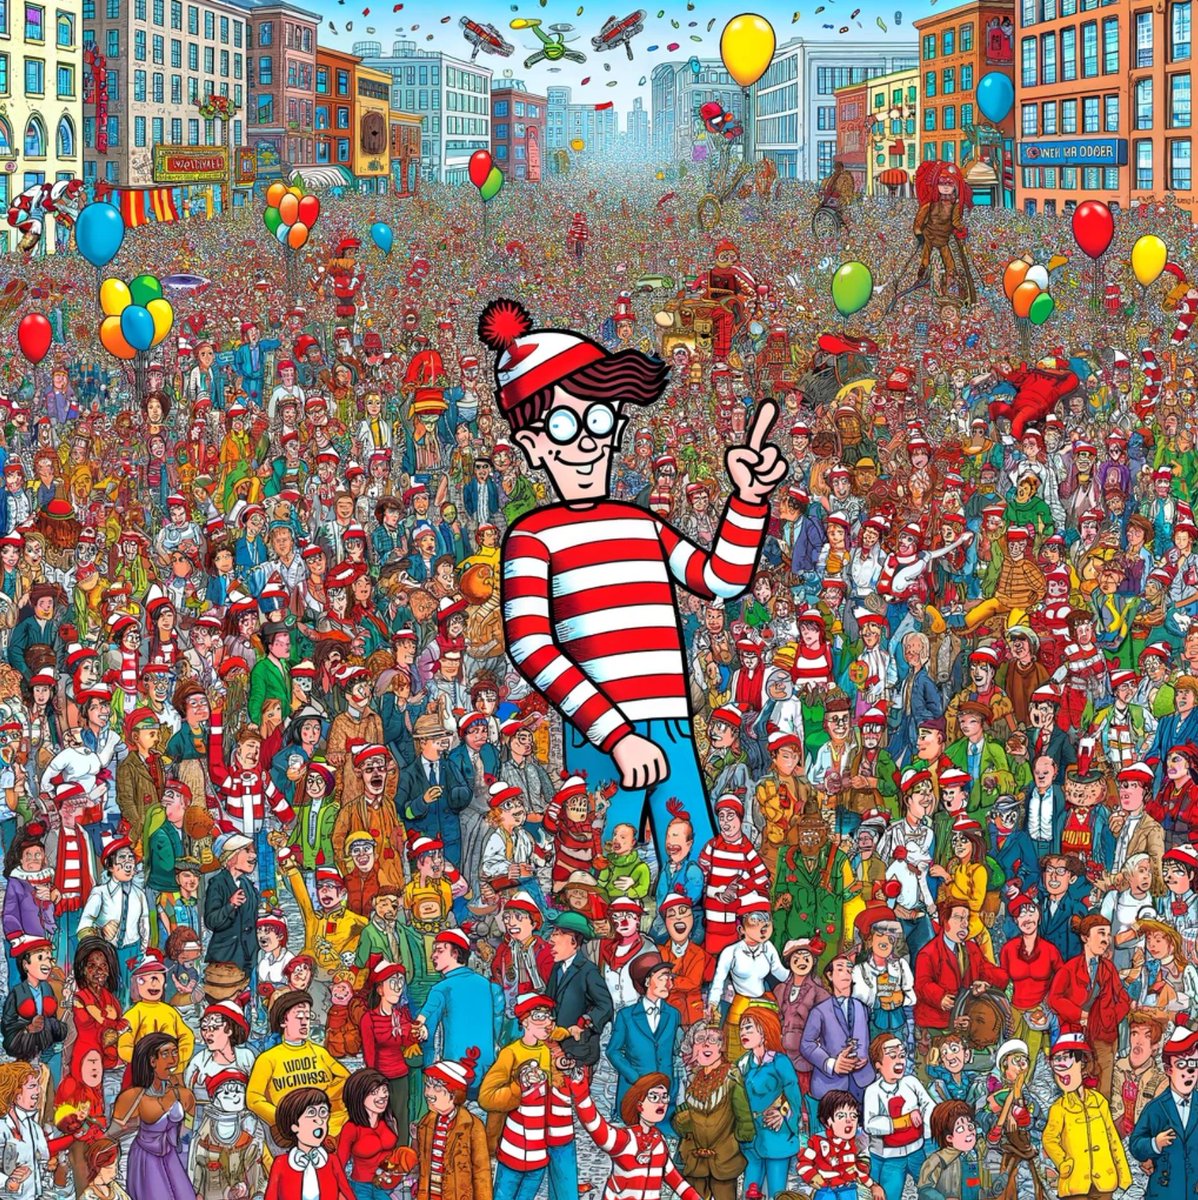 Image models still have a ways to go with semantic understanding lol

the prompt was 'a challenging where's waldo image where waldo is extremely well camouflaged and very well hidden'